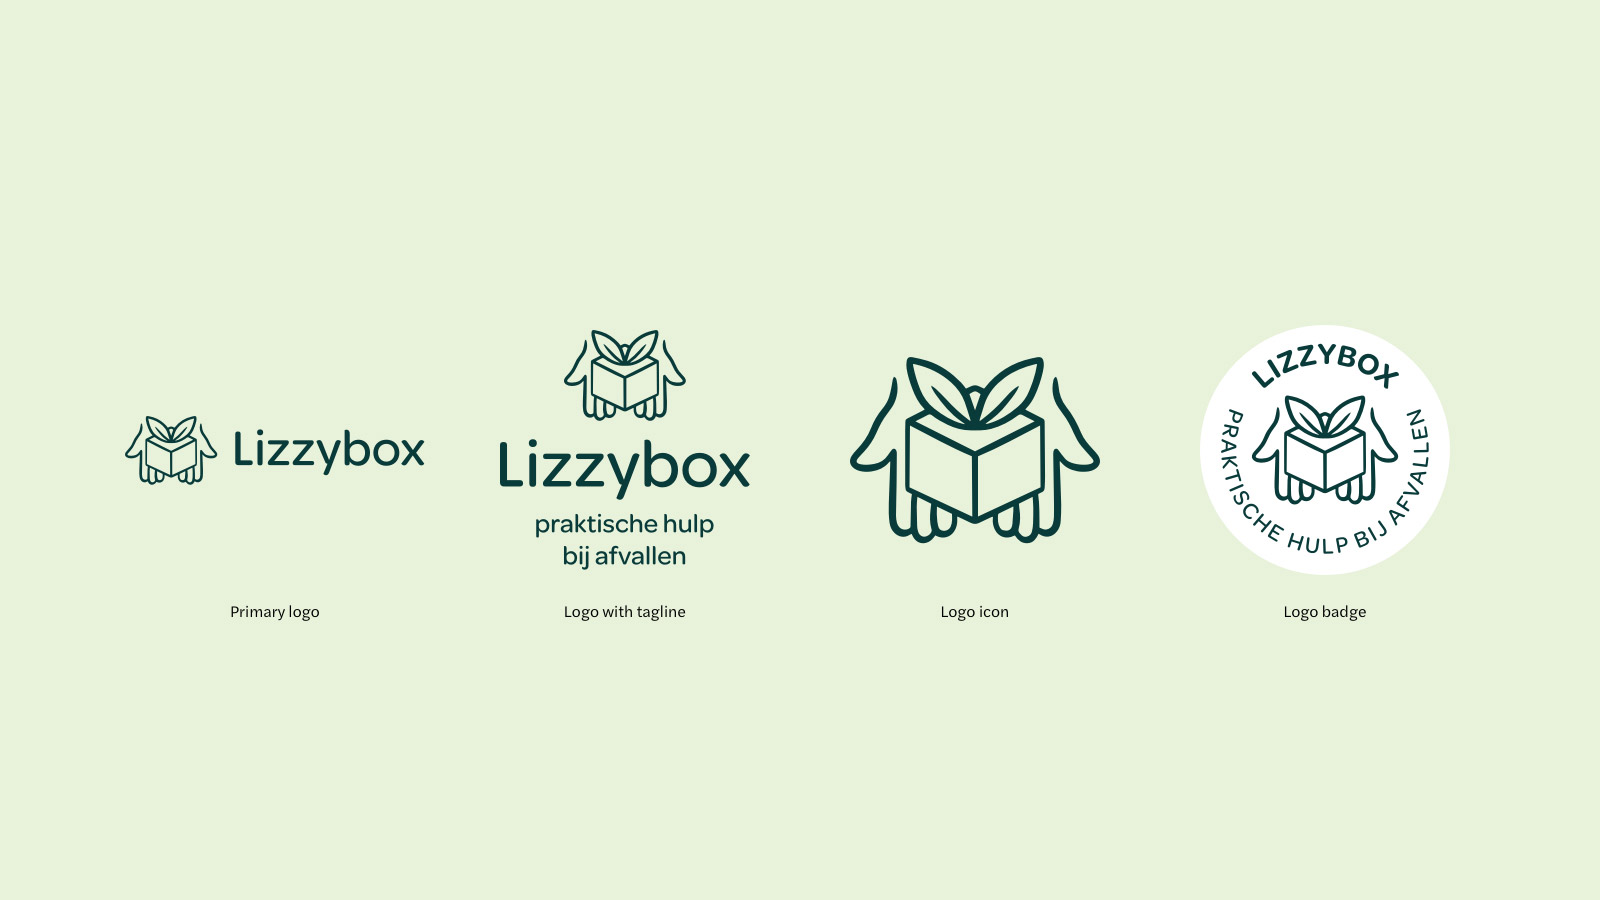  A colorful brand identity for getting healthy with Lizzybox